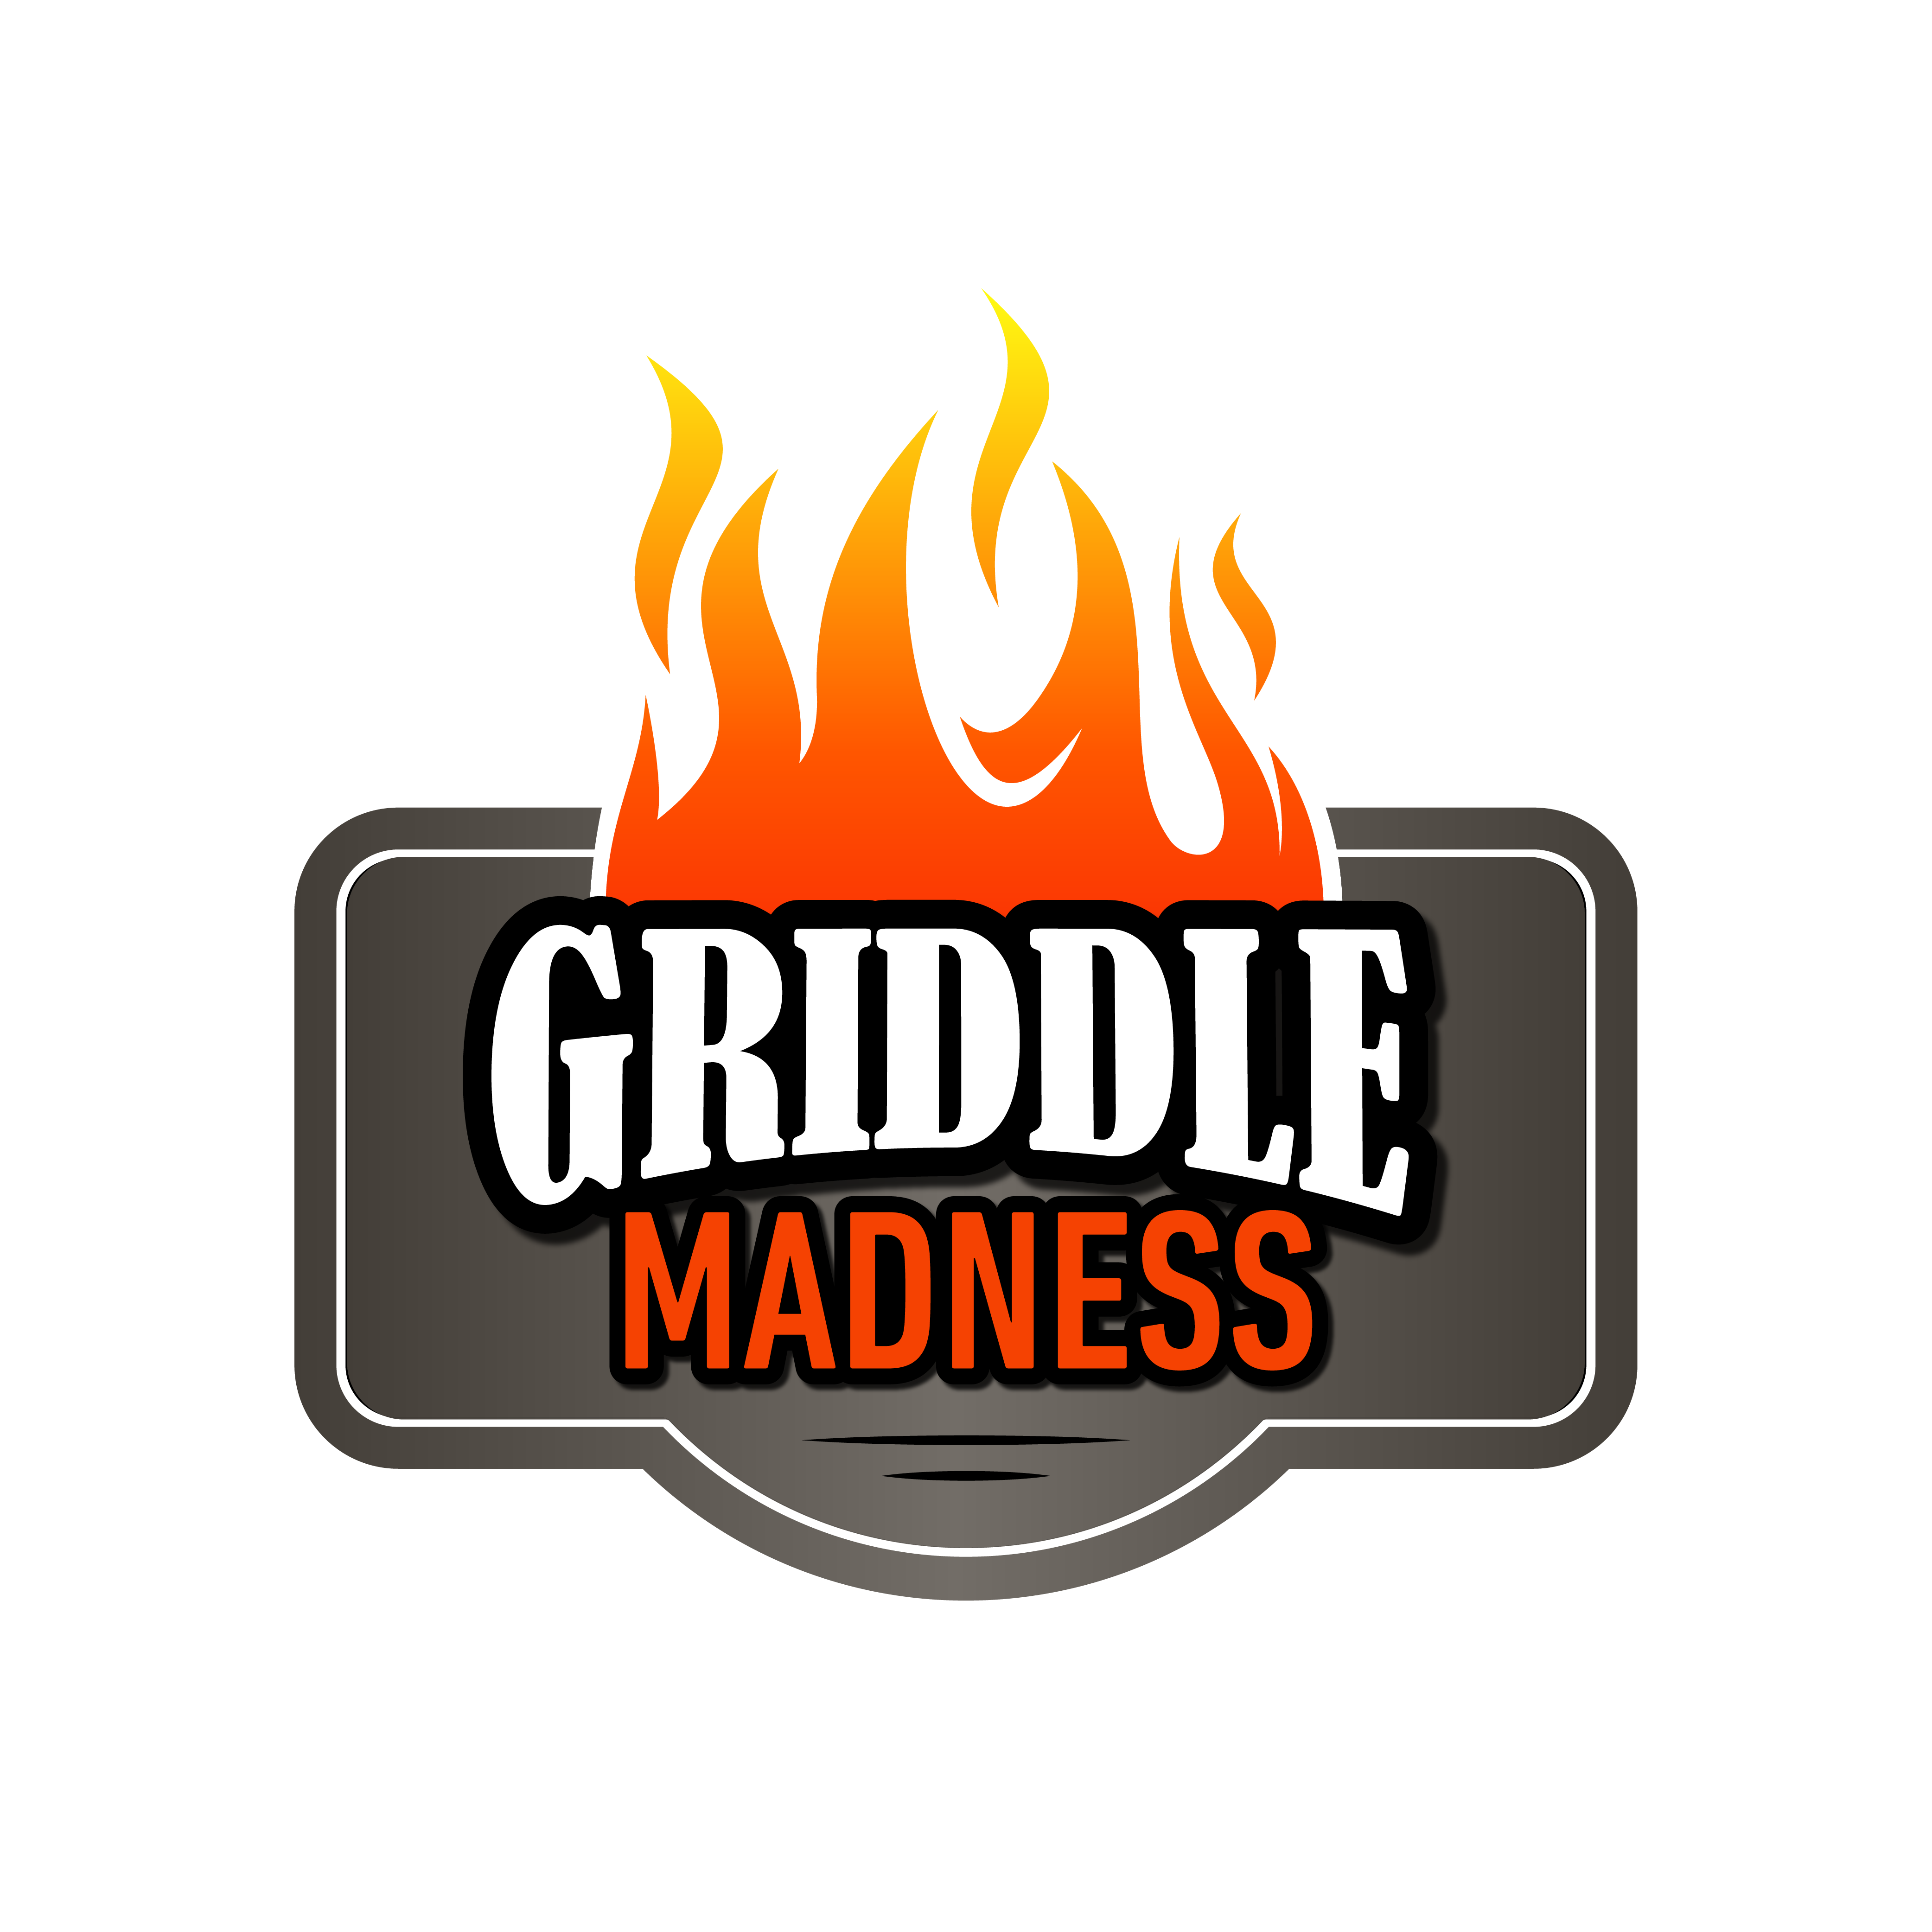 Griddle Madness